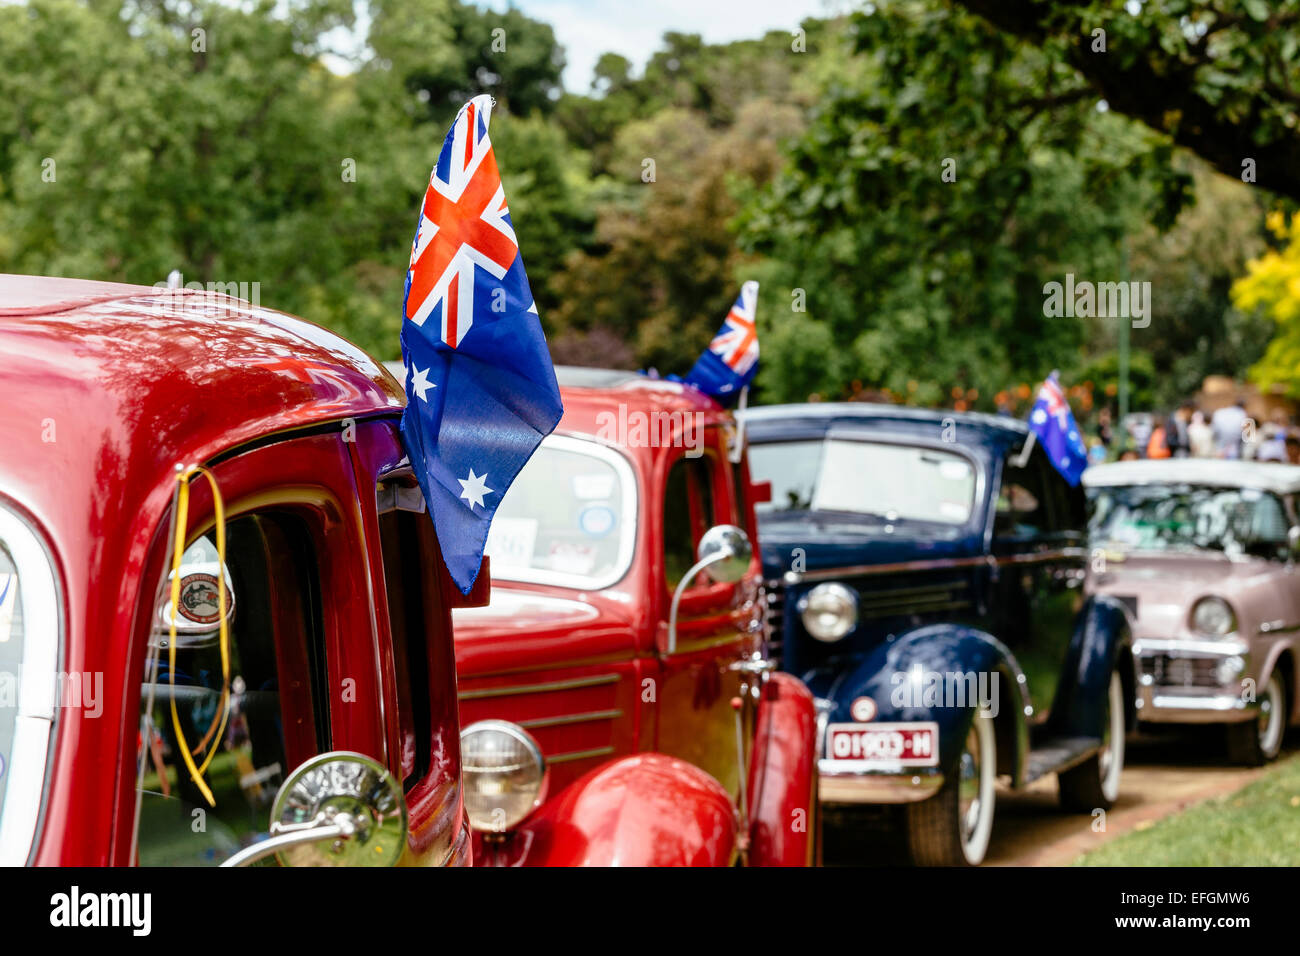 Classic cars on display, RACV Australia Day picnic and Federation Vehicle Display, Kings Domain, Melbourne, Victoria, Australia Stock Photo